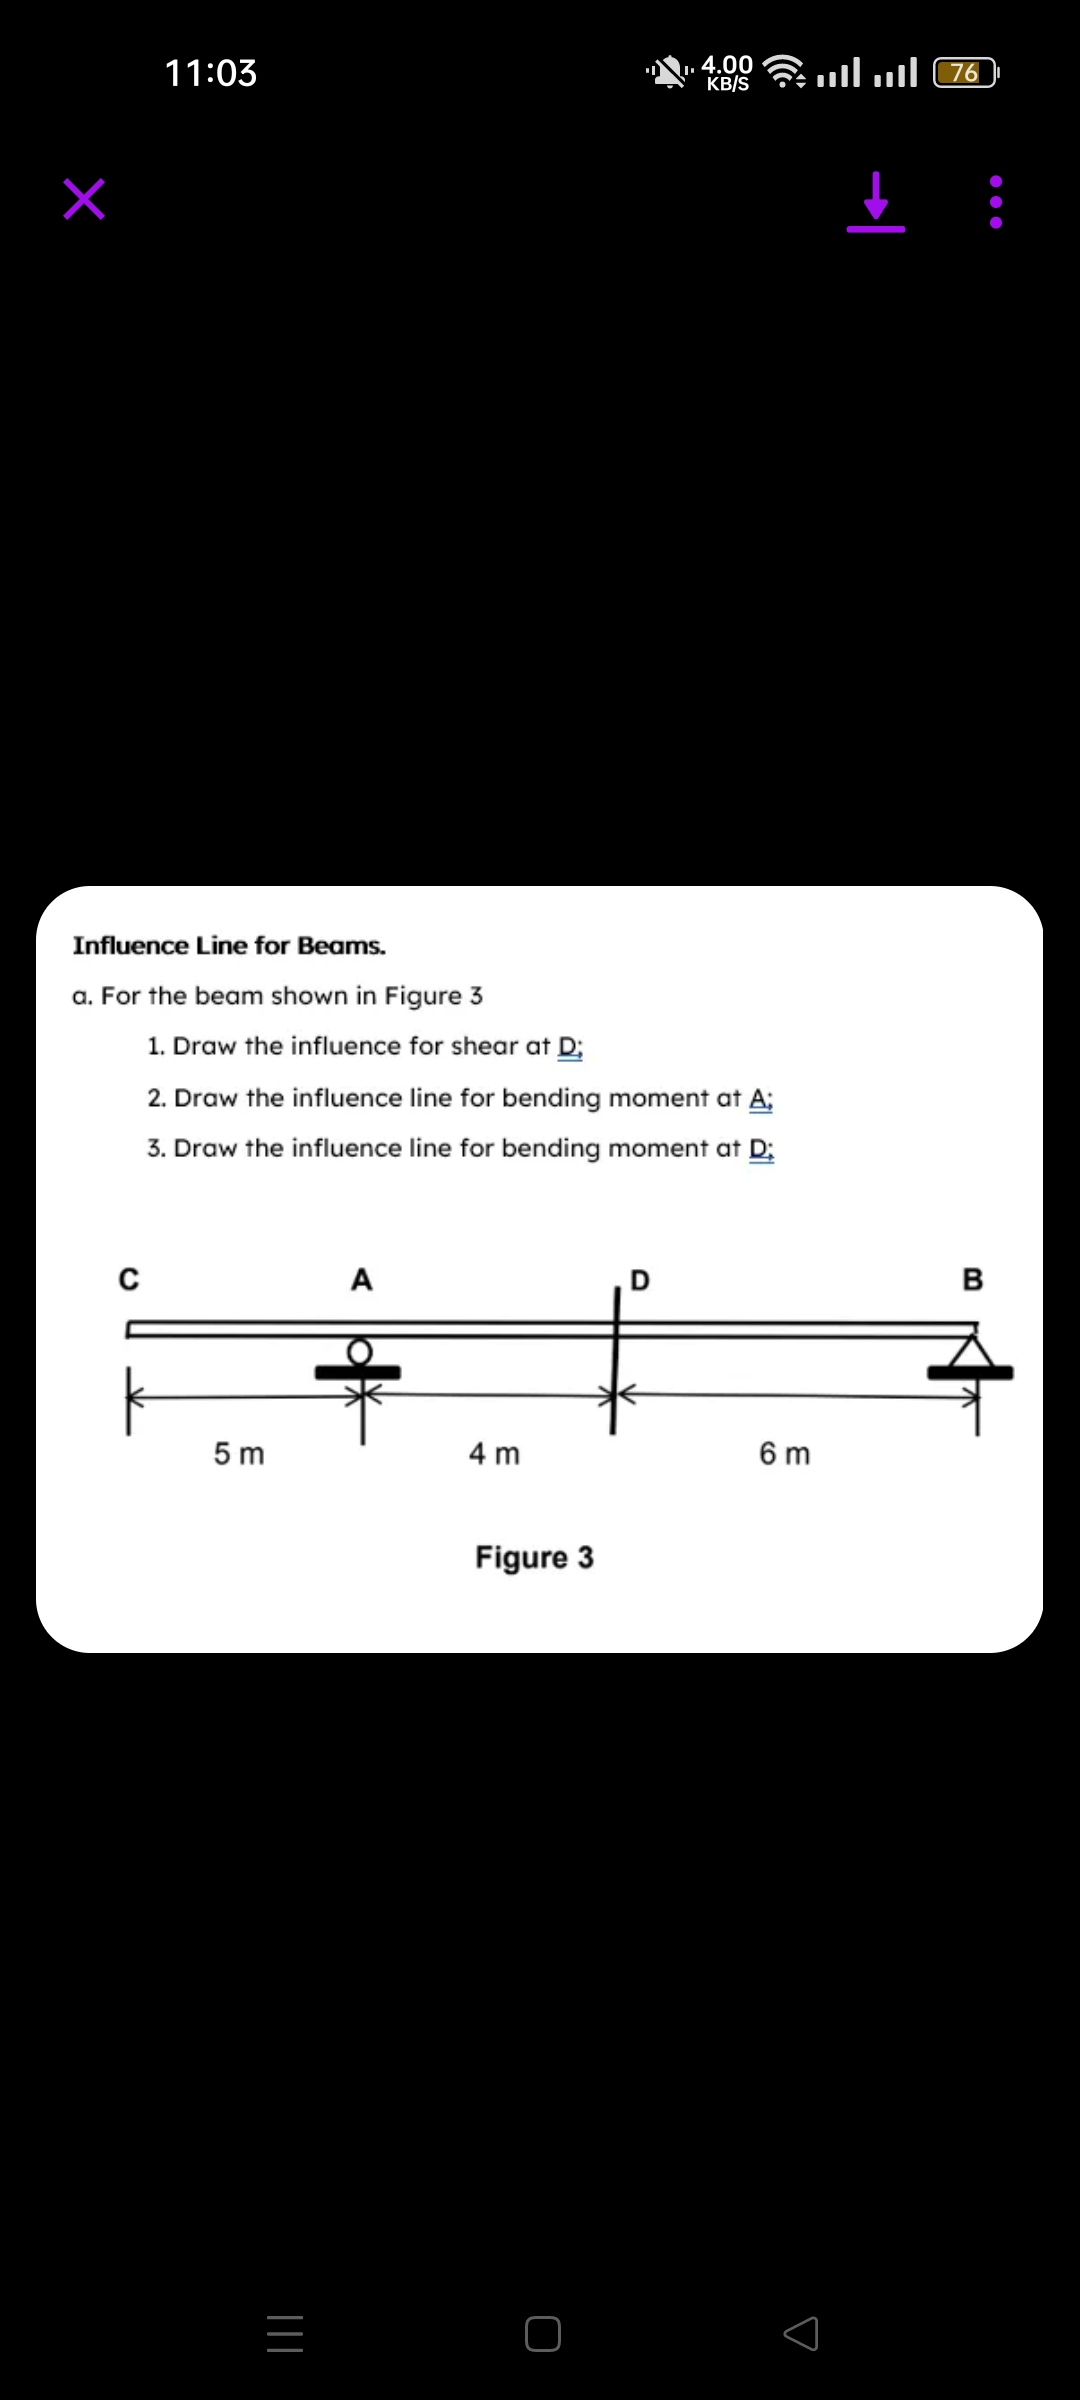 11:03
Influence Line for Beams.
a. For the beam shown in Figure 3
C
1. Draw the influence for shear at D;
2. Draw the influence line for bending moment at A;
3. Draw the influence line for bending moment at D:
5m
|||
A
4 m
4.00
KB/S
Figure 3
. .... .... 76
6 m
B